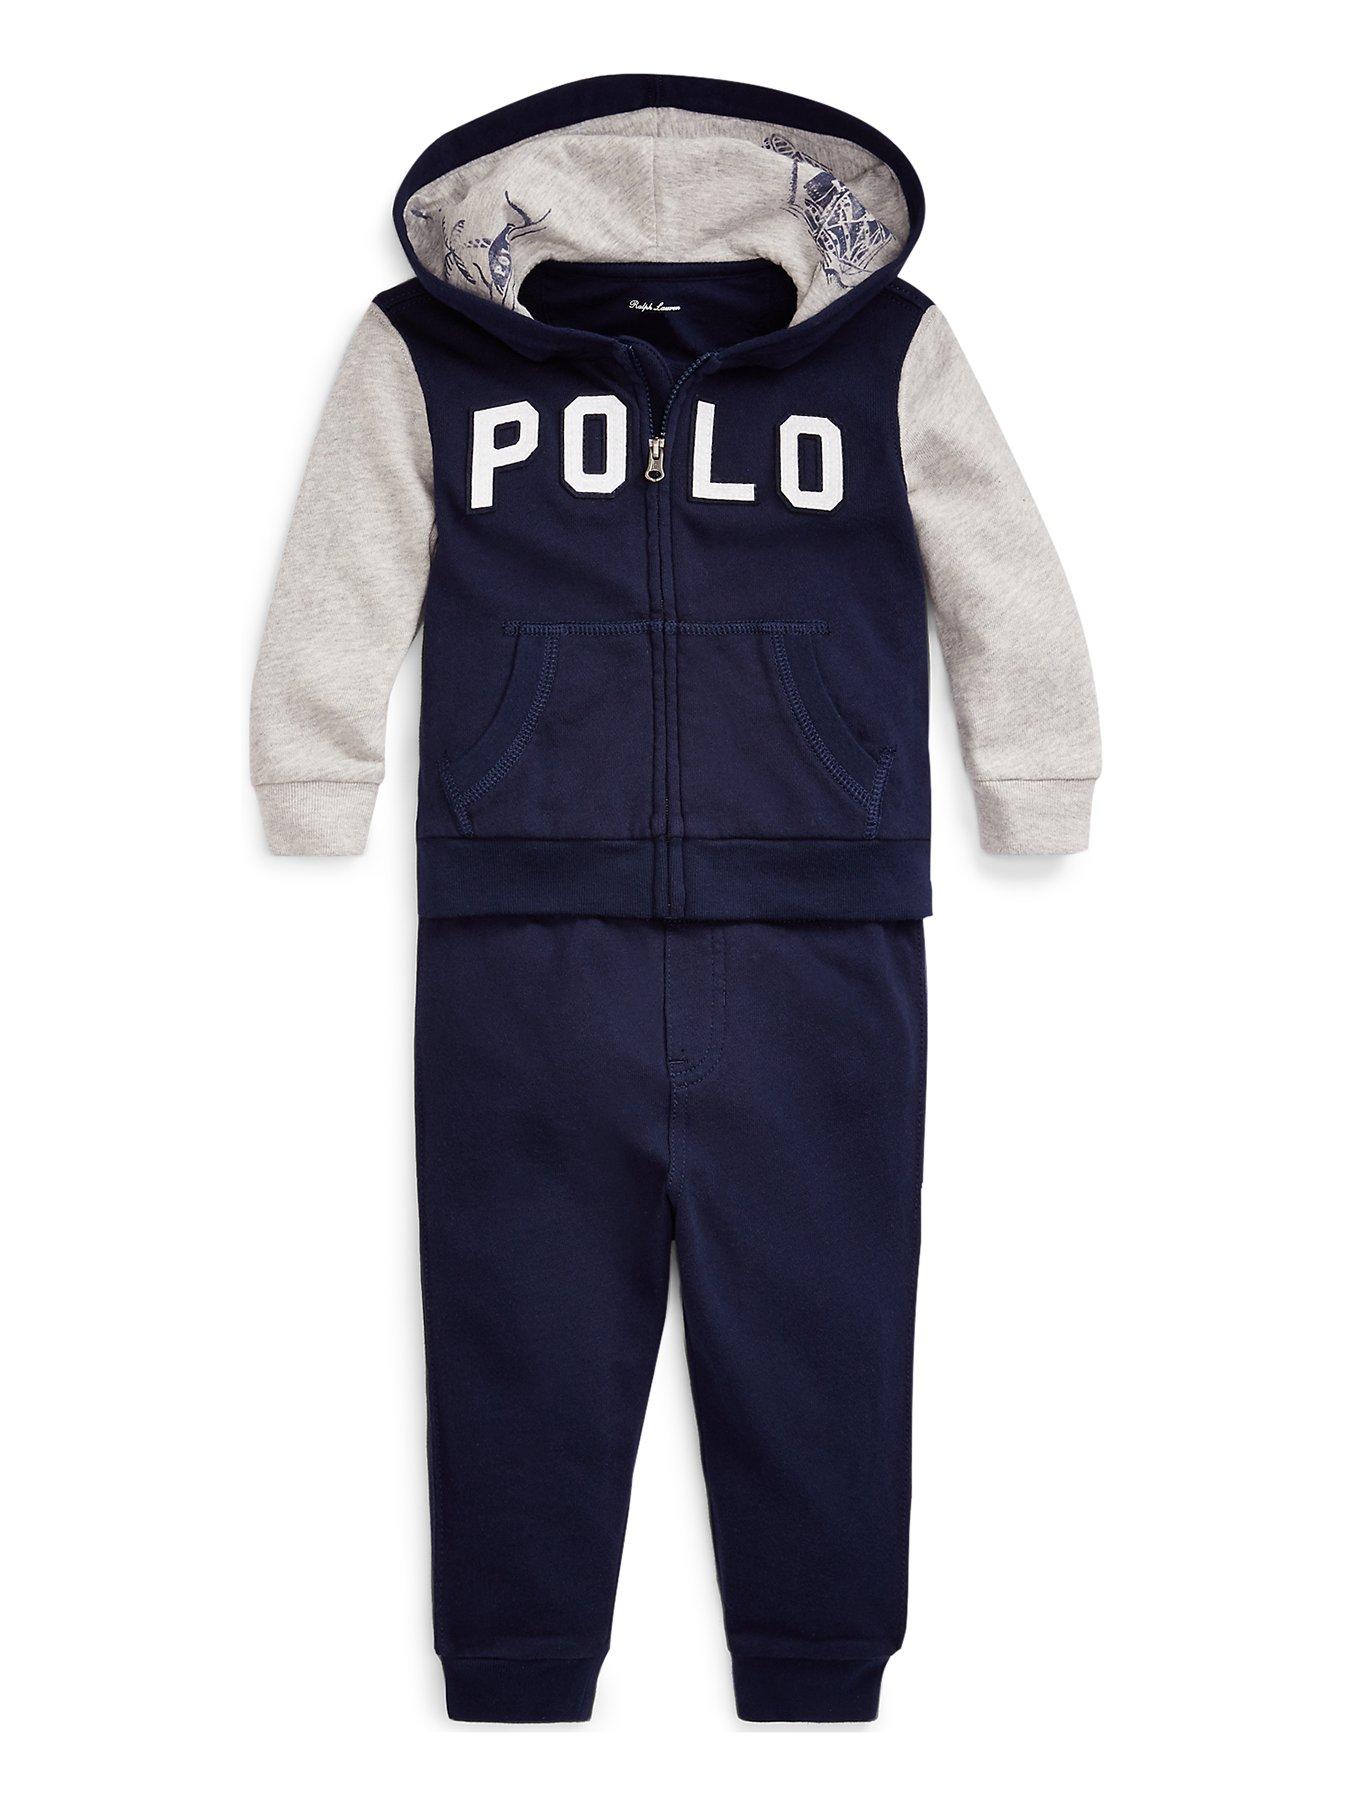 polo sweat suit for baby boy